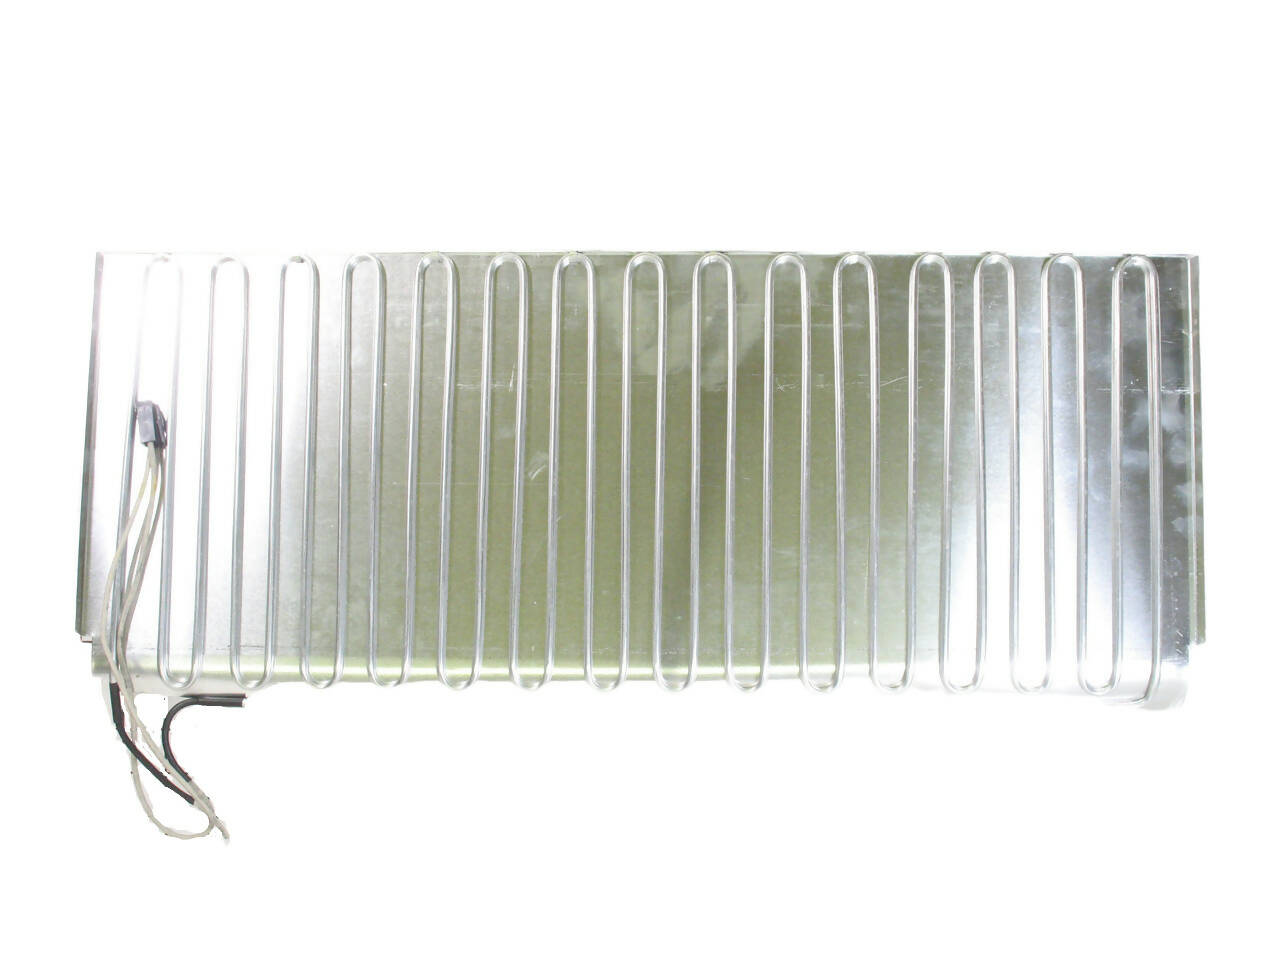 Defrost Heater - 00776275, Replaces: 00477389 477389 00685251 685251 00687368 687368 776275 PD00059572 OEM PARTS WORLD